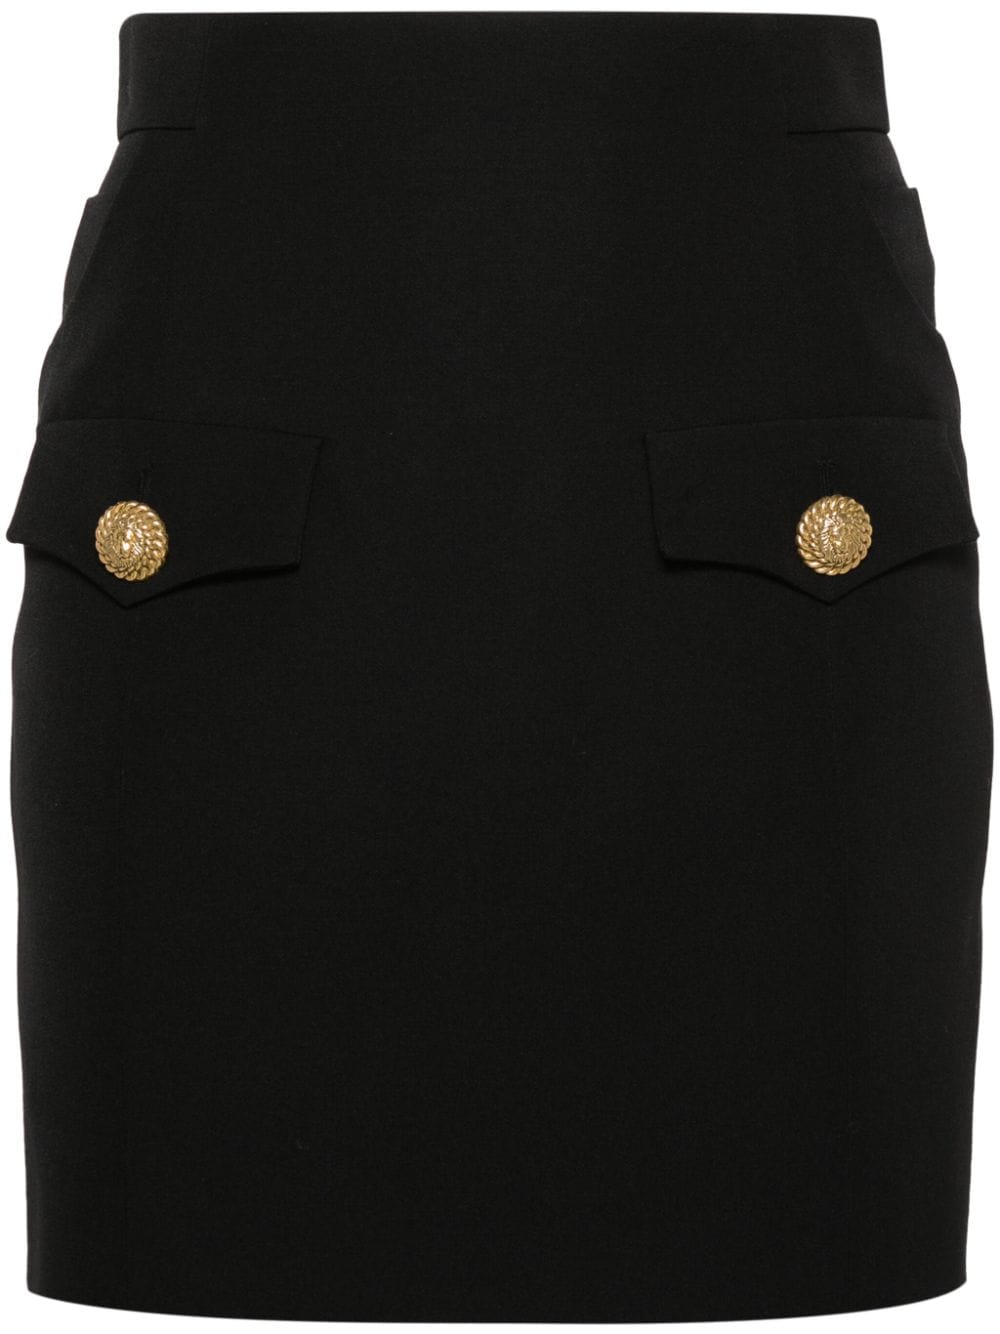 Balmain Black Wool Mini Skirt With Lion Head Buttons And Antique Hardware